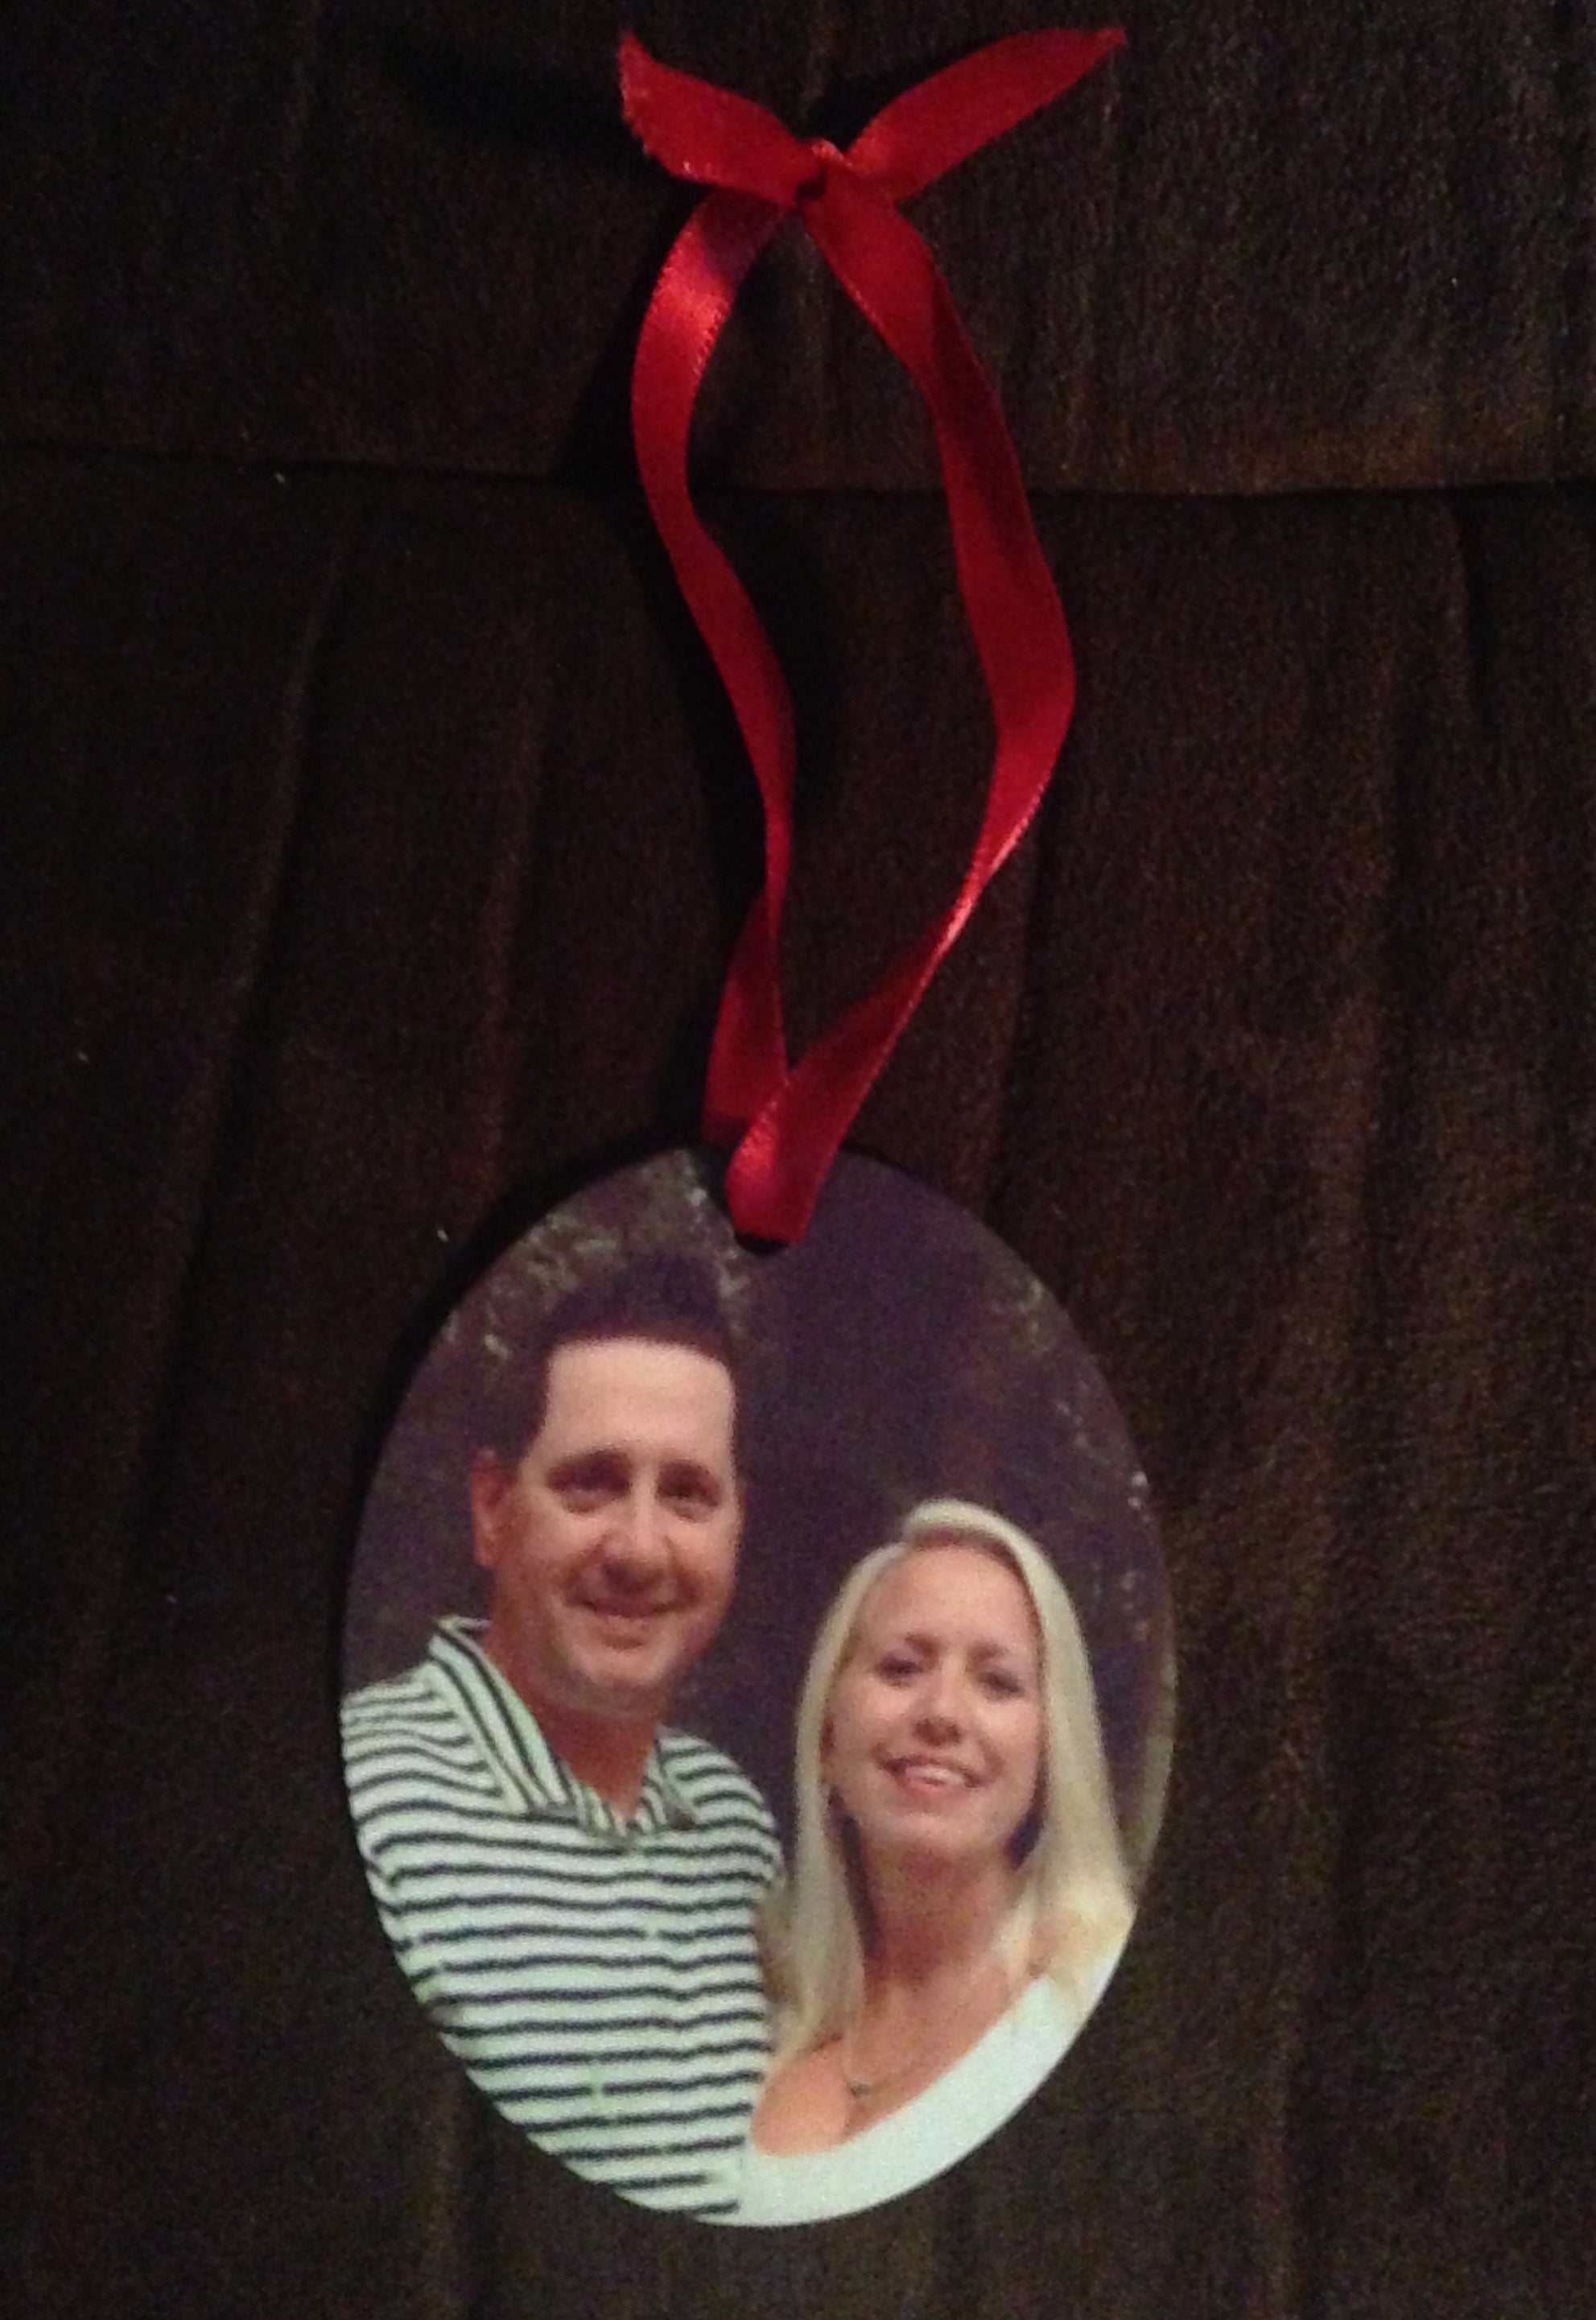 Personalized Photo Oval Ornament - Double Sided Custom Design